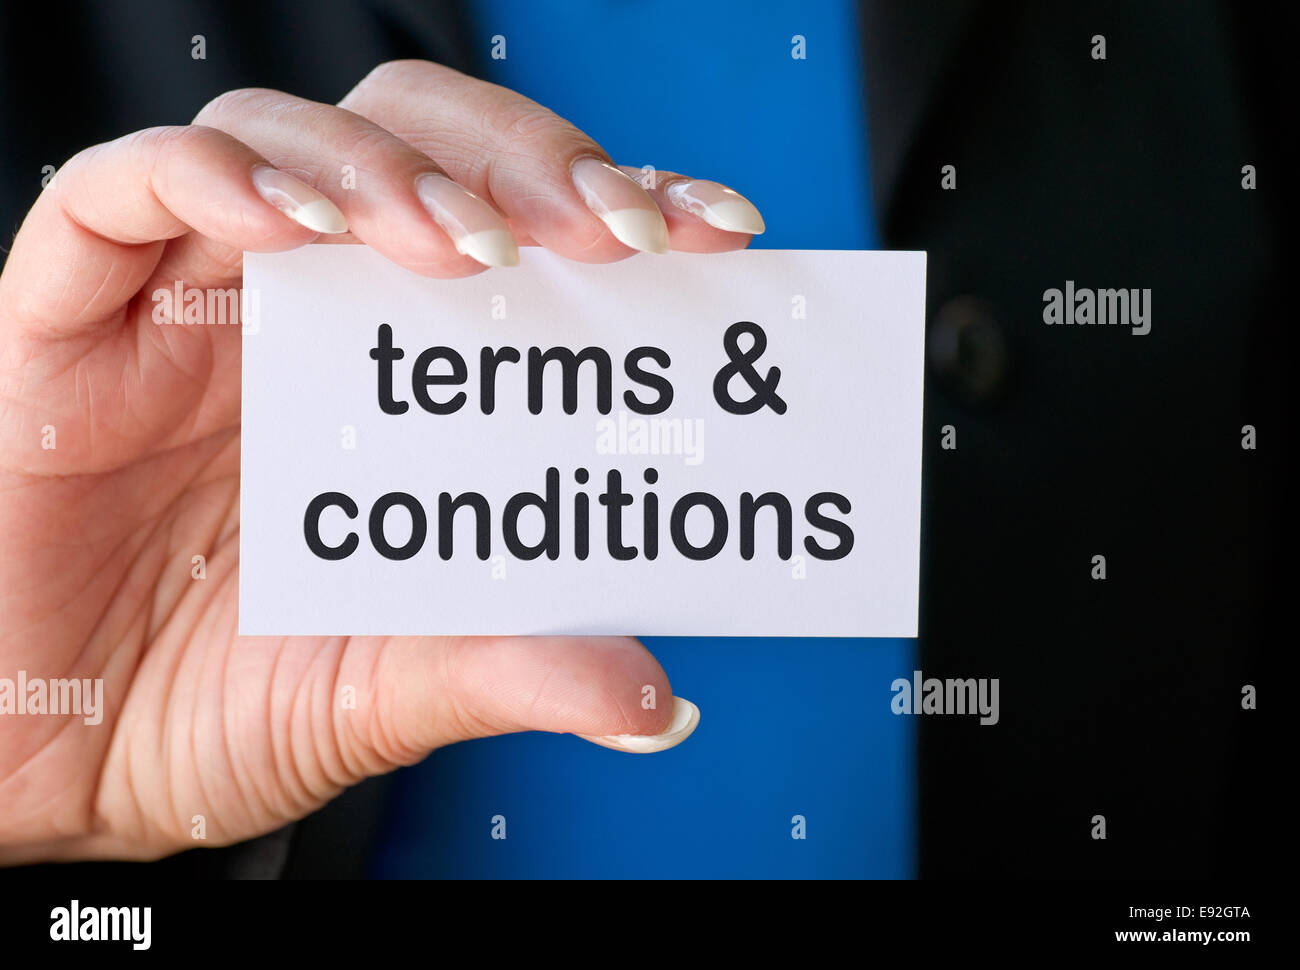 terms and conditions Stock Photo